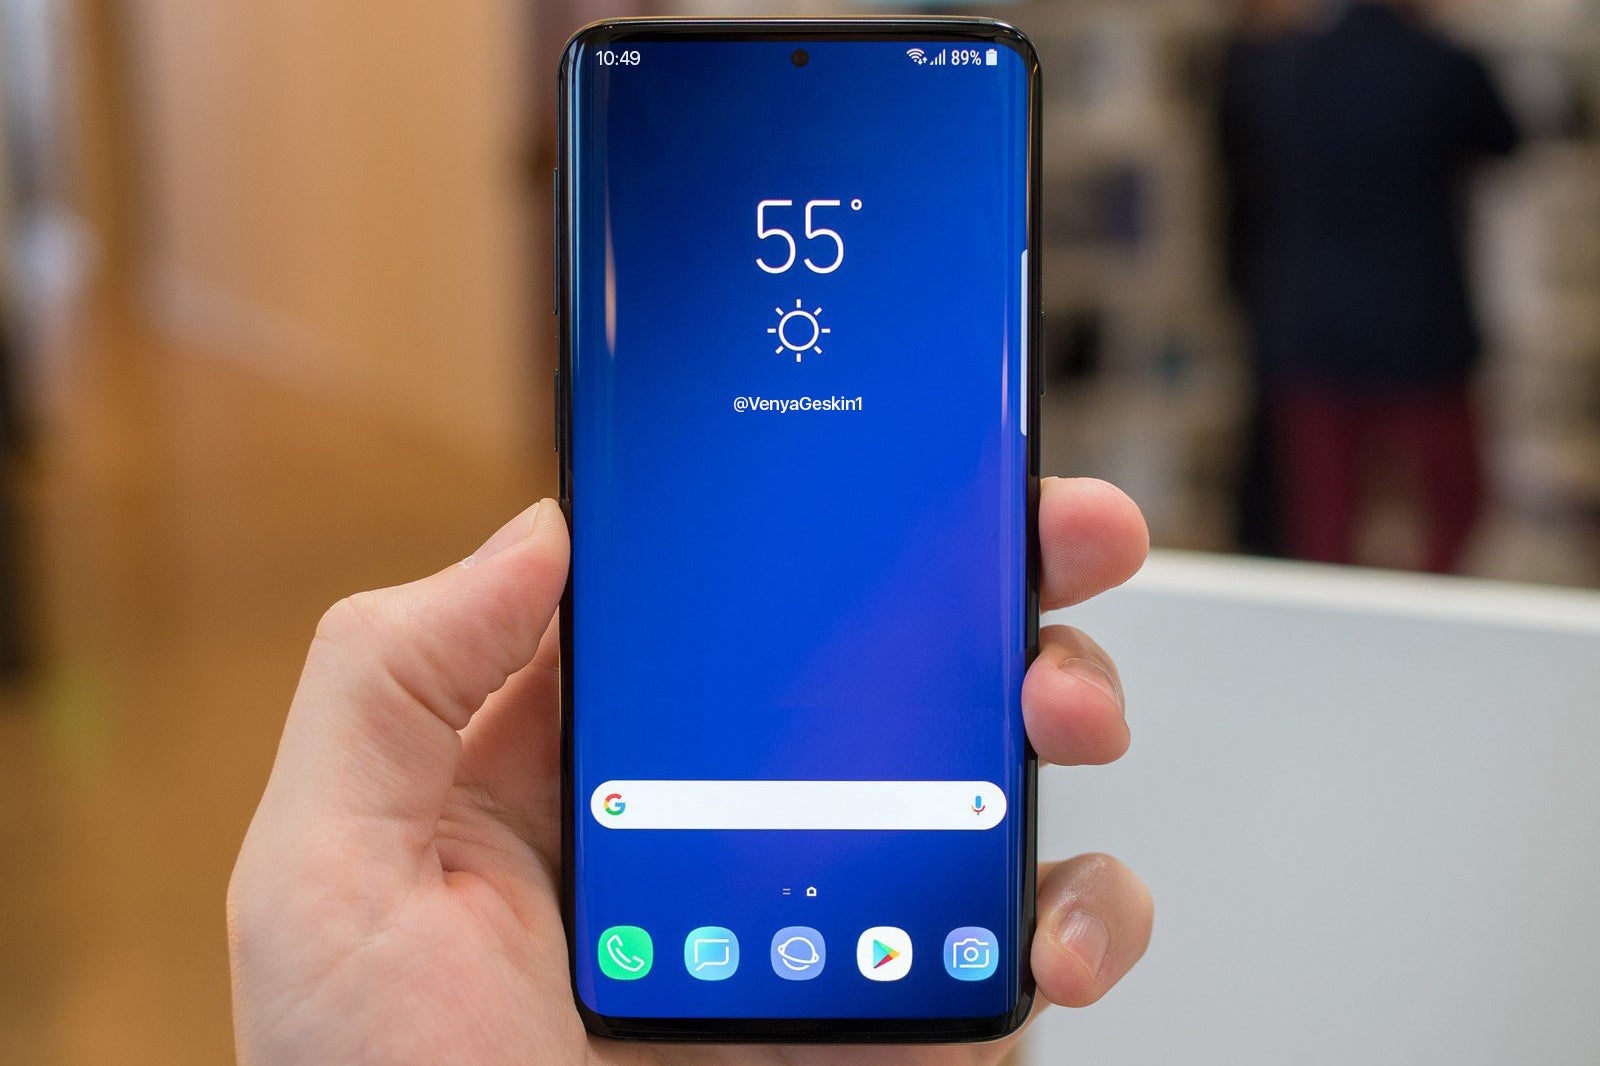 Render showing an all-screen Galaxy S10 with camera piercing - Samsung's Galaxy S10 lineup might ditch the iris-scanning functionality